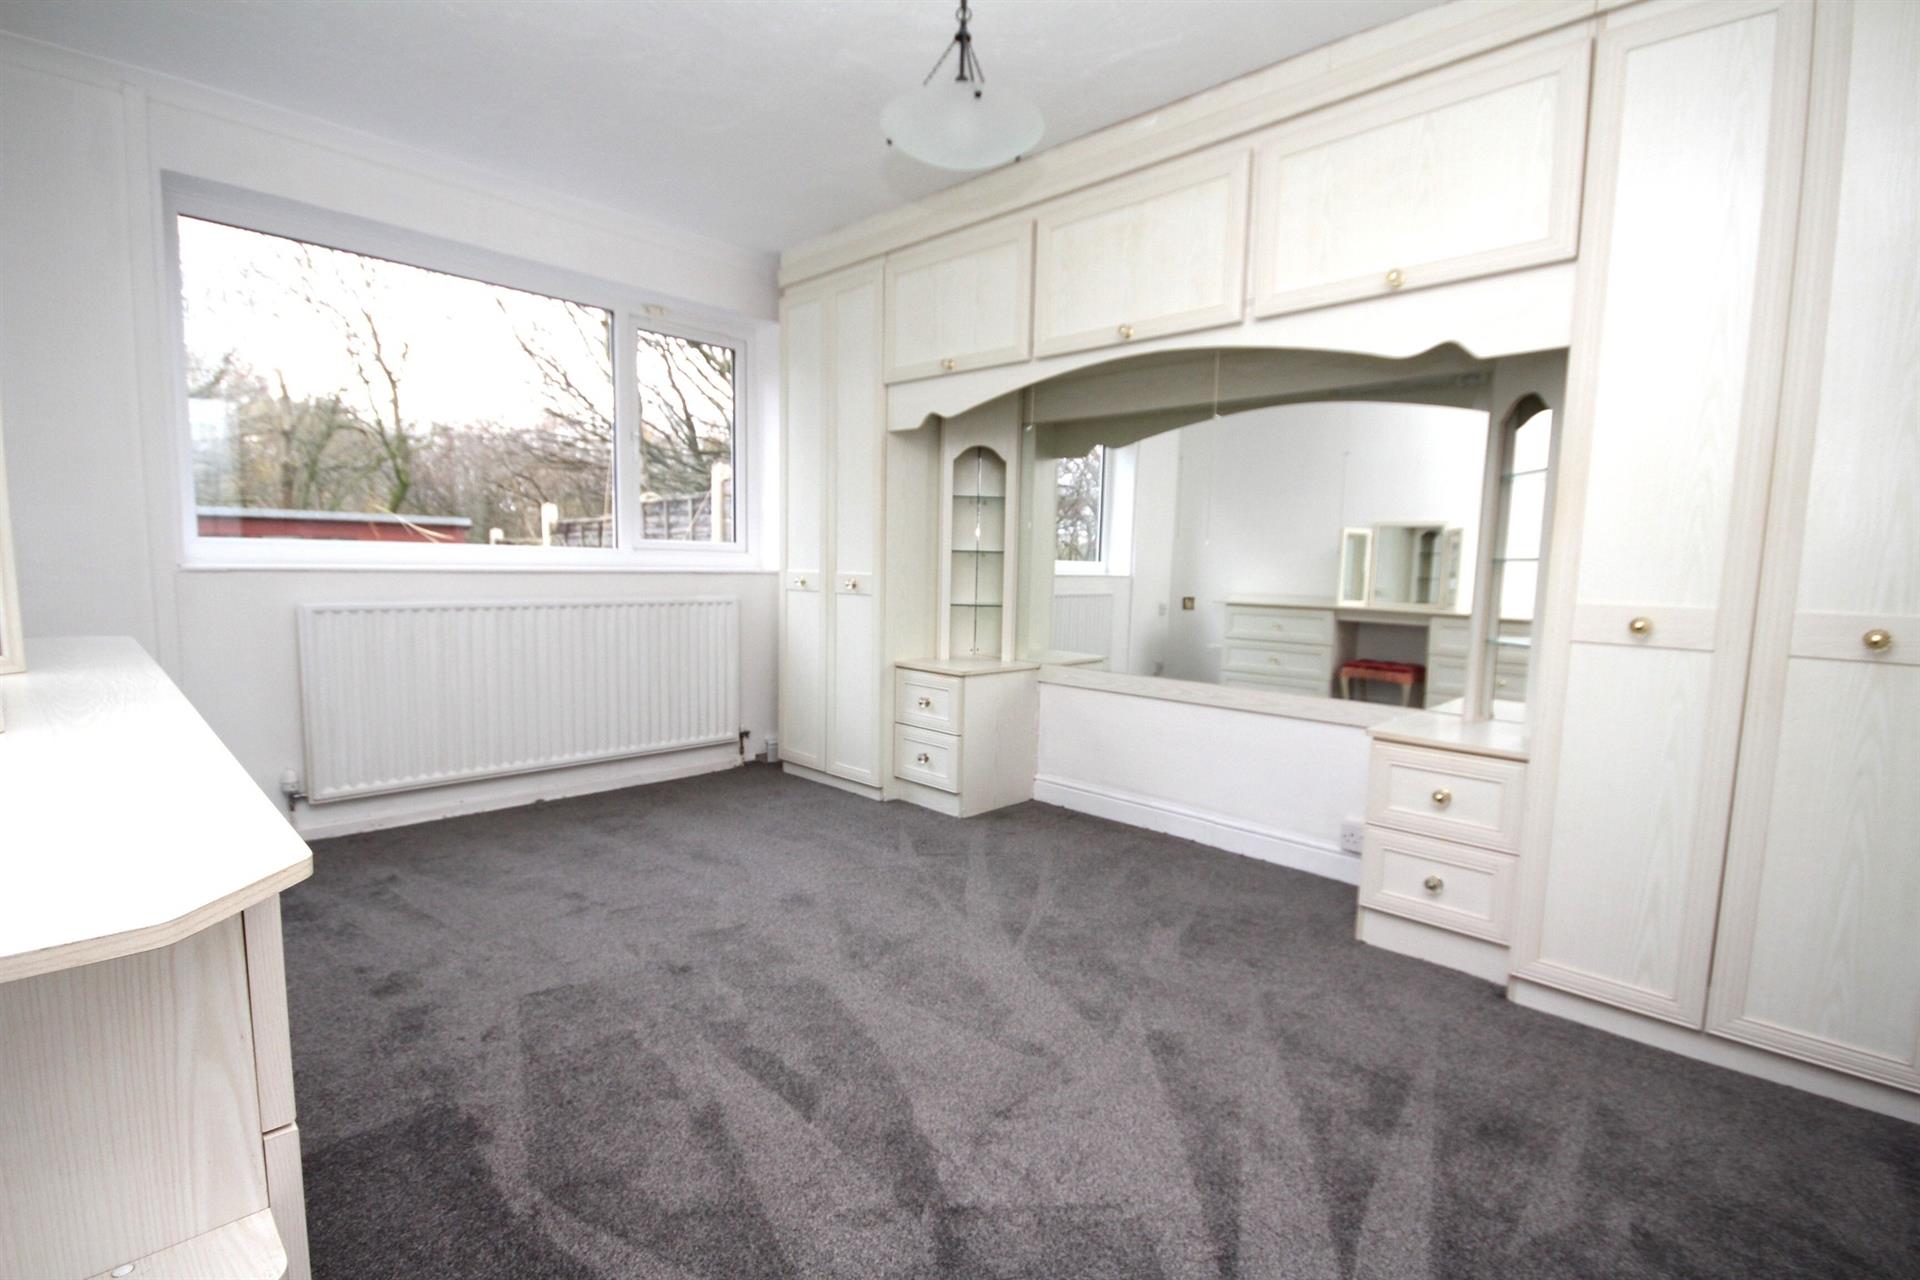 2 bedroom bungalow Let Agreed in Bolton, Greater Manchester - Master bedroom.